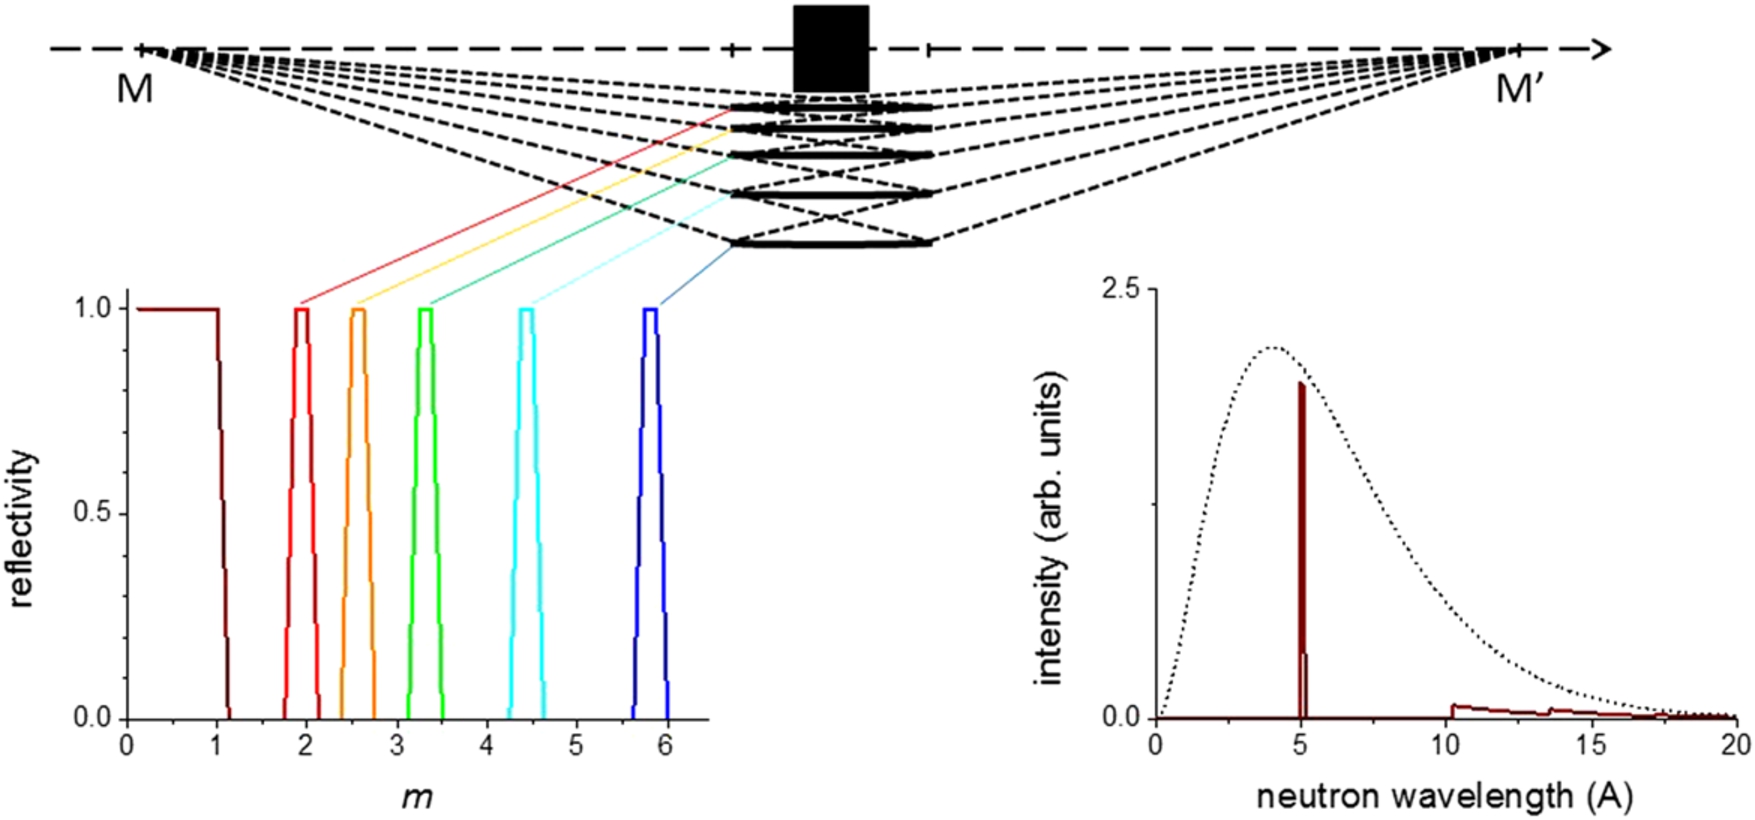 Effect of bandpass supermirror coatings on the neutron wavelength spectrum transported by a nested-mirror system. Reflectivity curves shown in the lower left graph (with indication of the locations of the corresponding mirrors by straight lines) are designed to transport from the incident spectrum (dashed curve in the lower right graph) a common narrow wavelength band at about 5 Å. Total reflectivity of the supermirrors (plateau for m<1 common for all mirrors) contaminates the spectrum with long-wavelength neutrons visible at wavelengths ≳10Å.